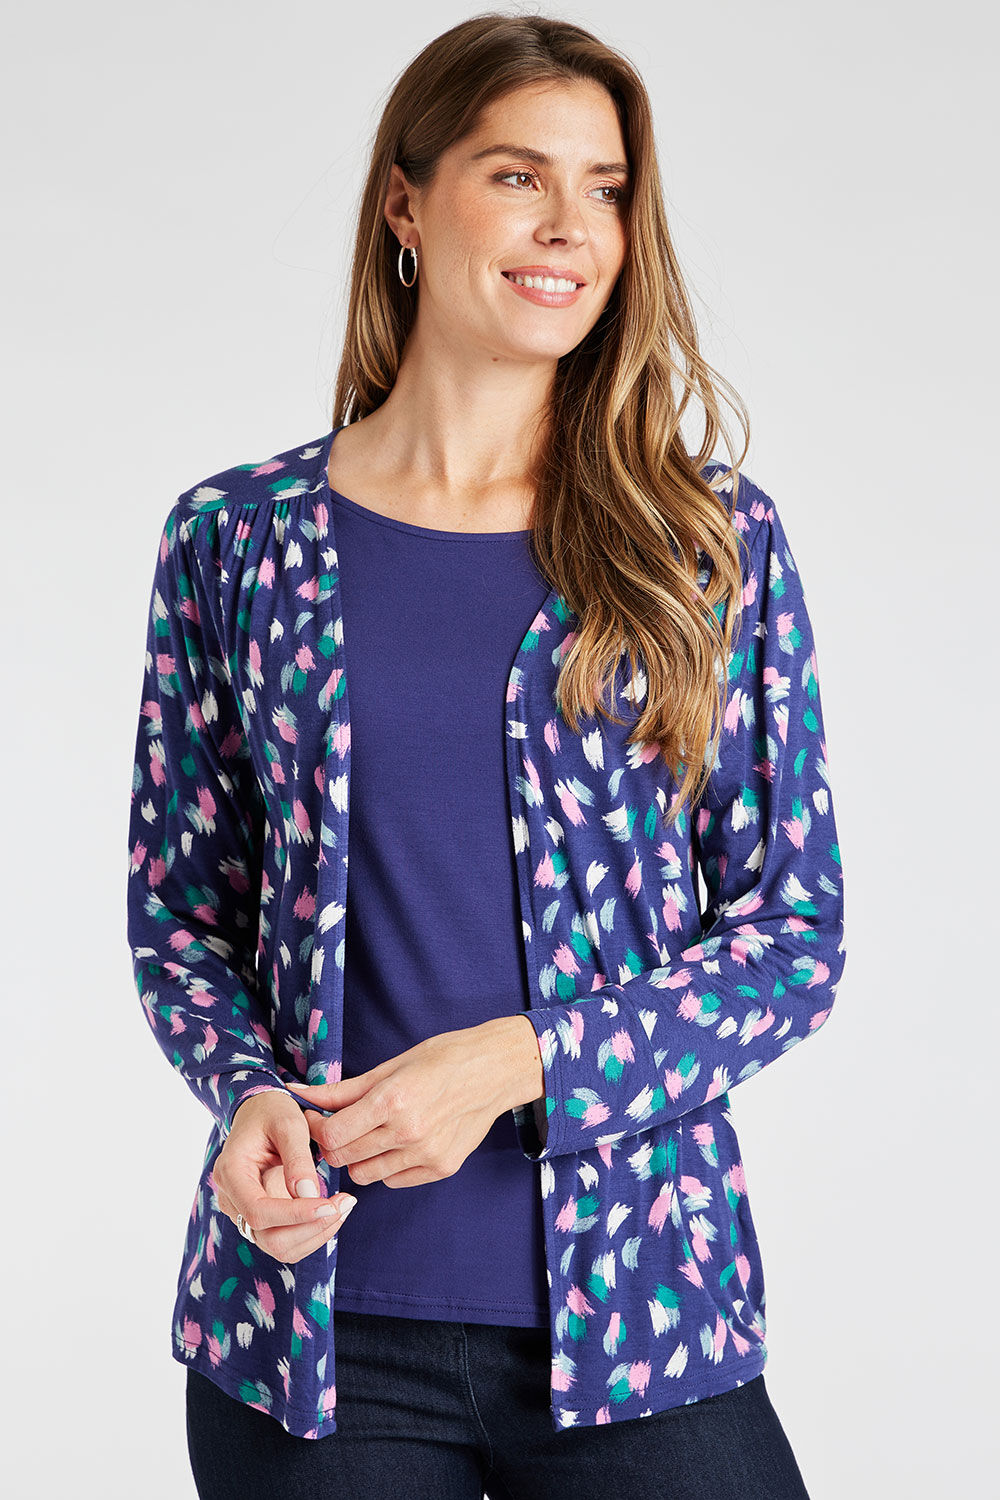 Dash Navy Long Sleeve 2 in 1 Print Cardigan and Plain Top, Size: 12